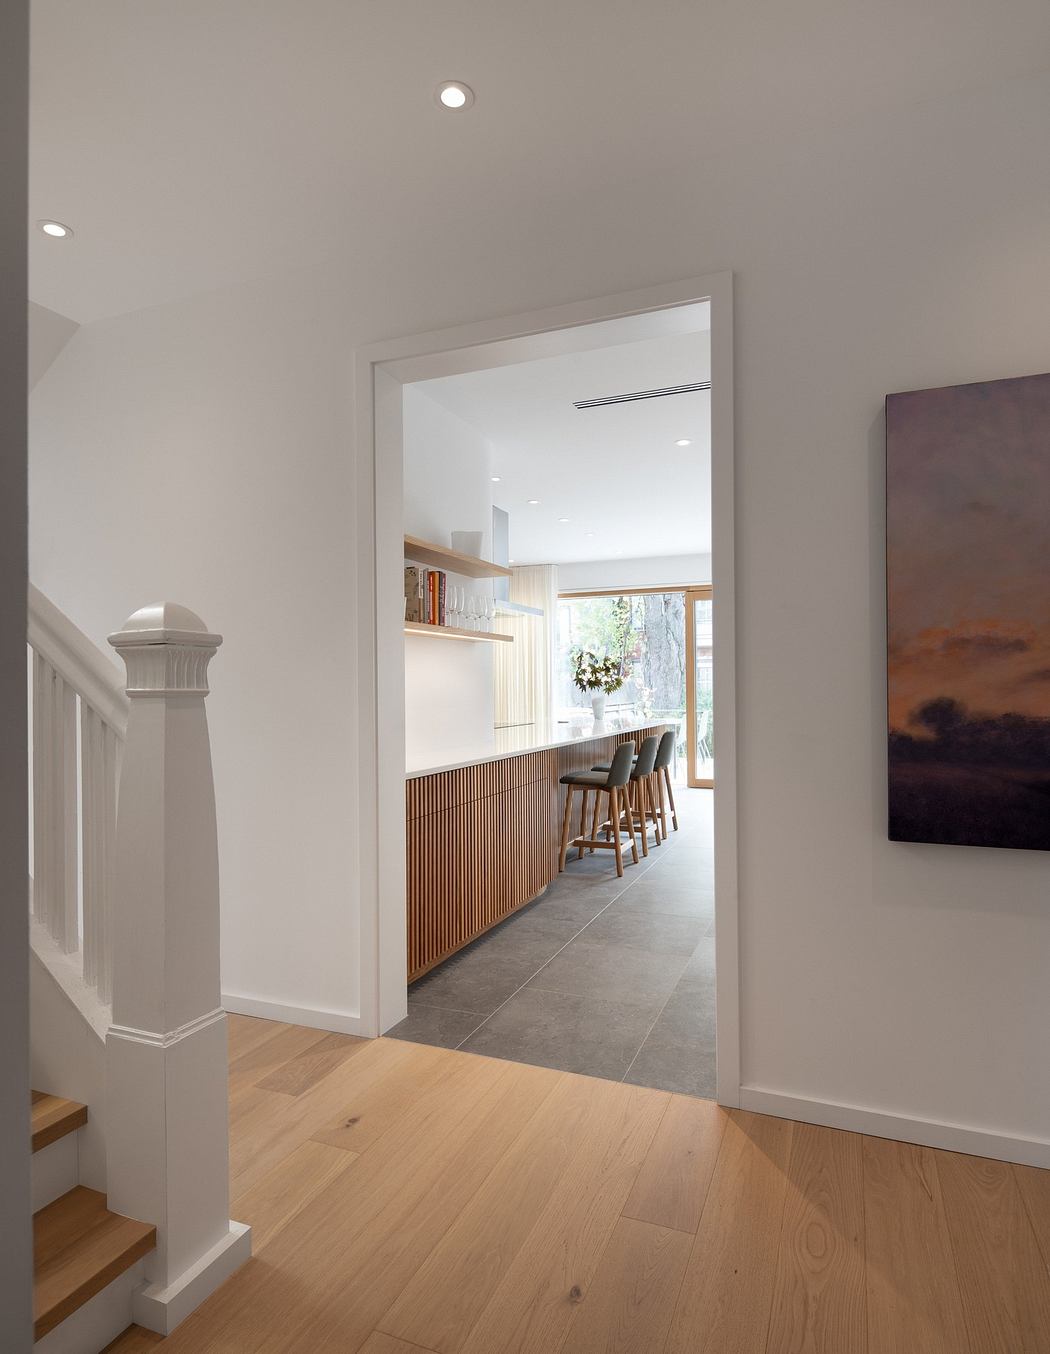 View from a hallway into a modern kitchen with wooden floors and a dining area.